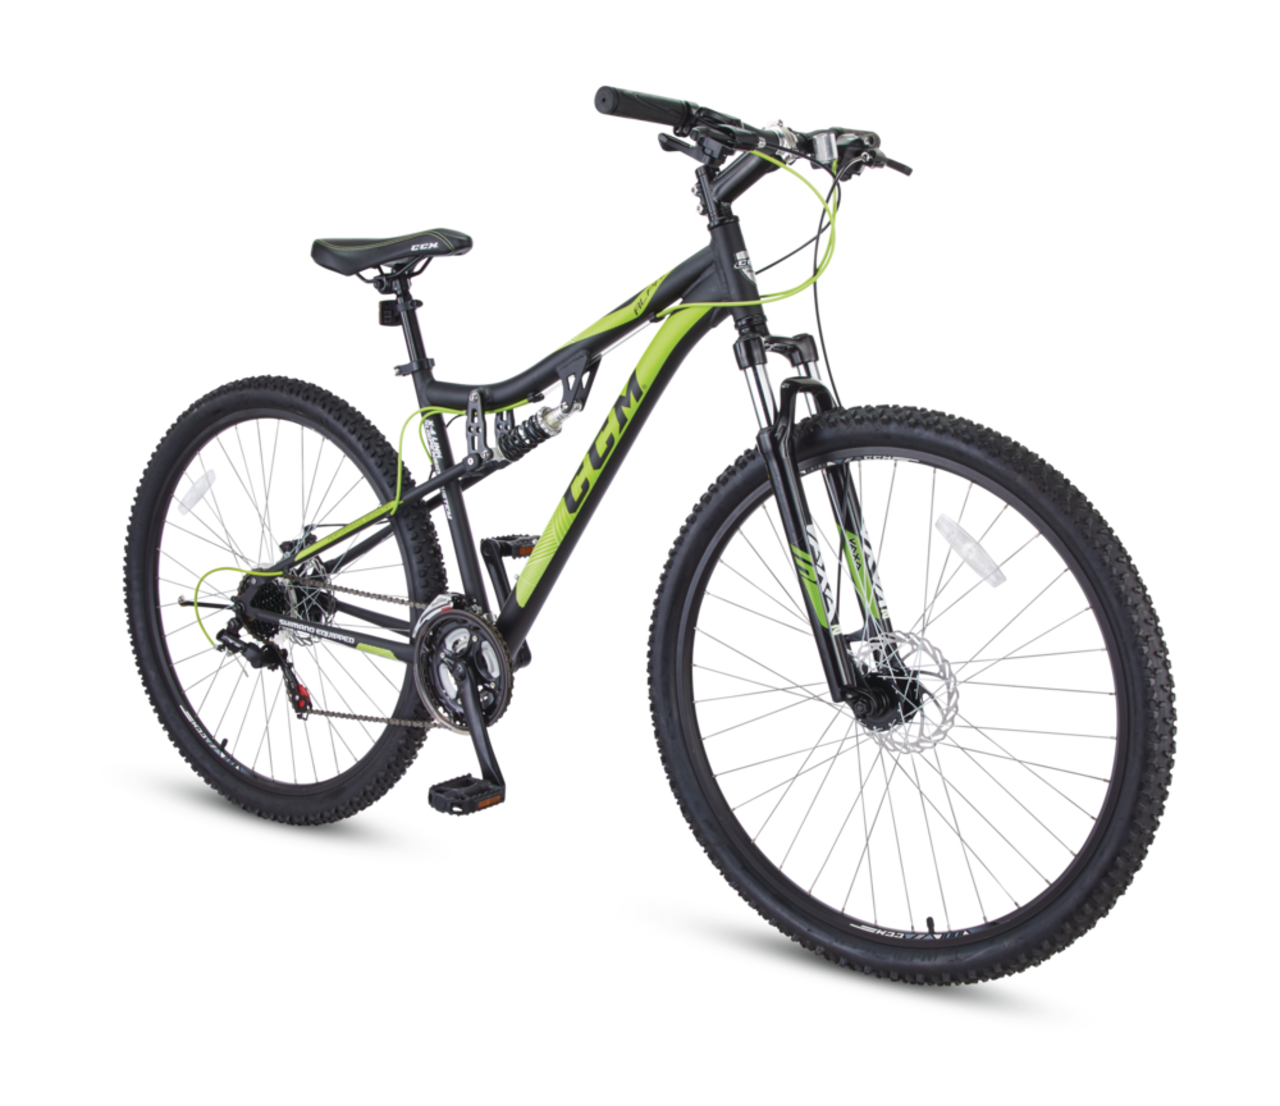 https://media-www.canadiantire.ca/product/playing/cycling/bicycles/0711045/ccm-alpha-29-dual-suspension-mountain-bike-fc9906a7-1f14-471f-b5cb-c54aef41cff9.png?imdensity=1&imwidth=640&impolicy=mZoom